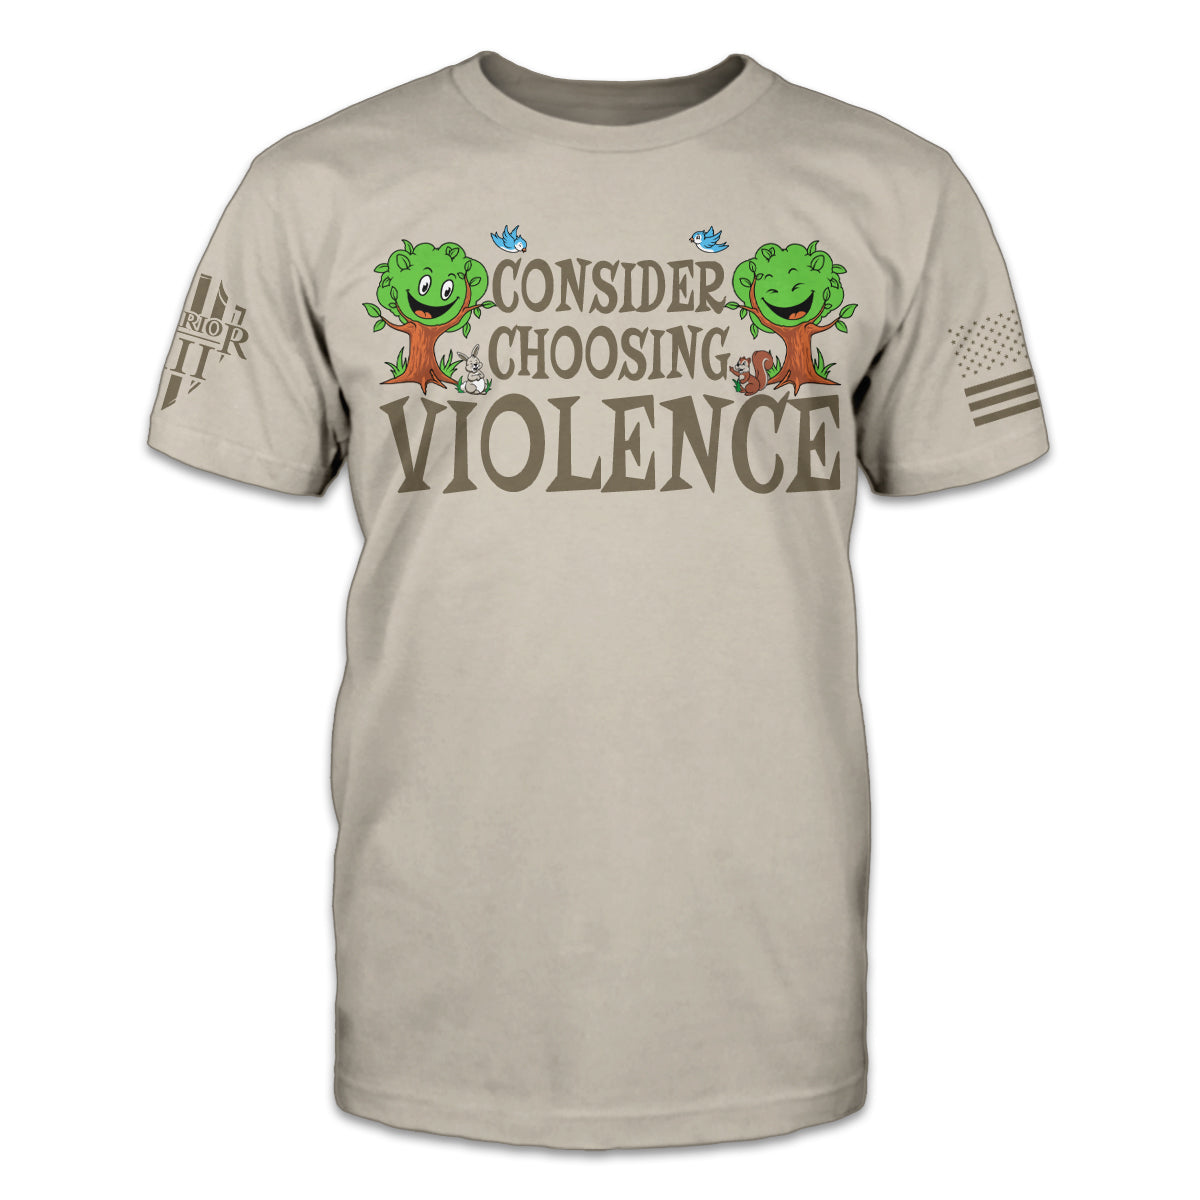 A light tan t-shirt with an image of happy smiling cartoon trees, birds, a squirrel, and a rabbit, looking at the words "Consider Choosing Violence"